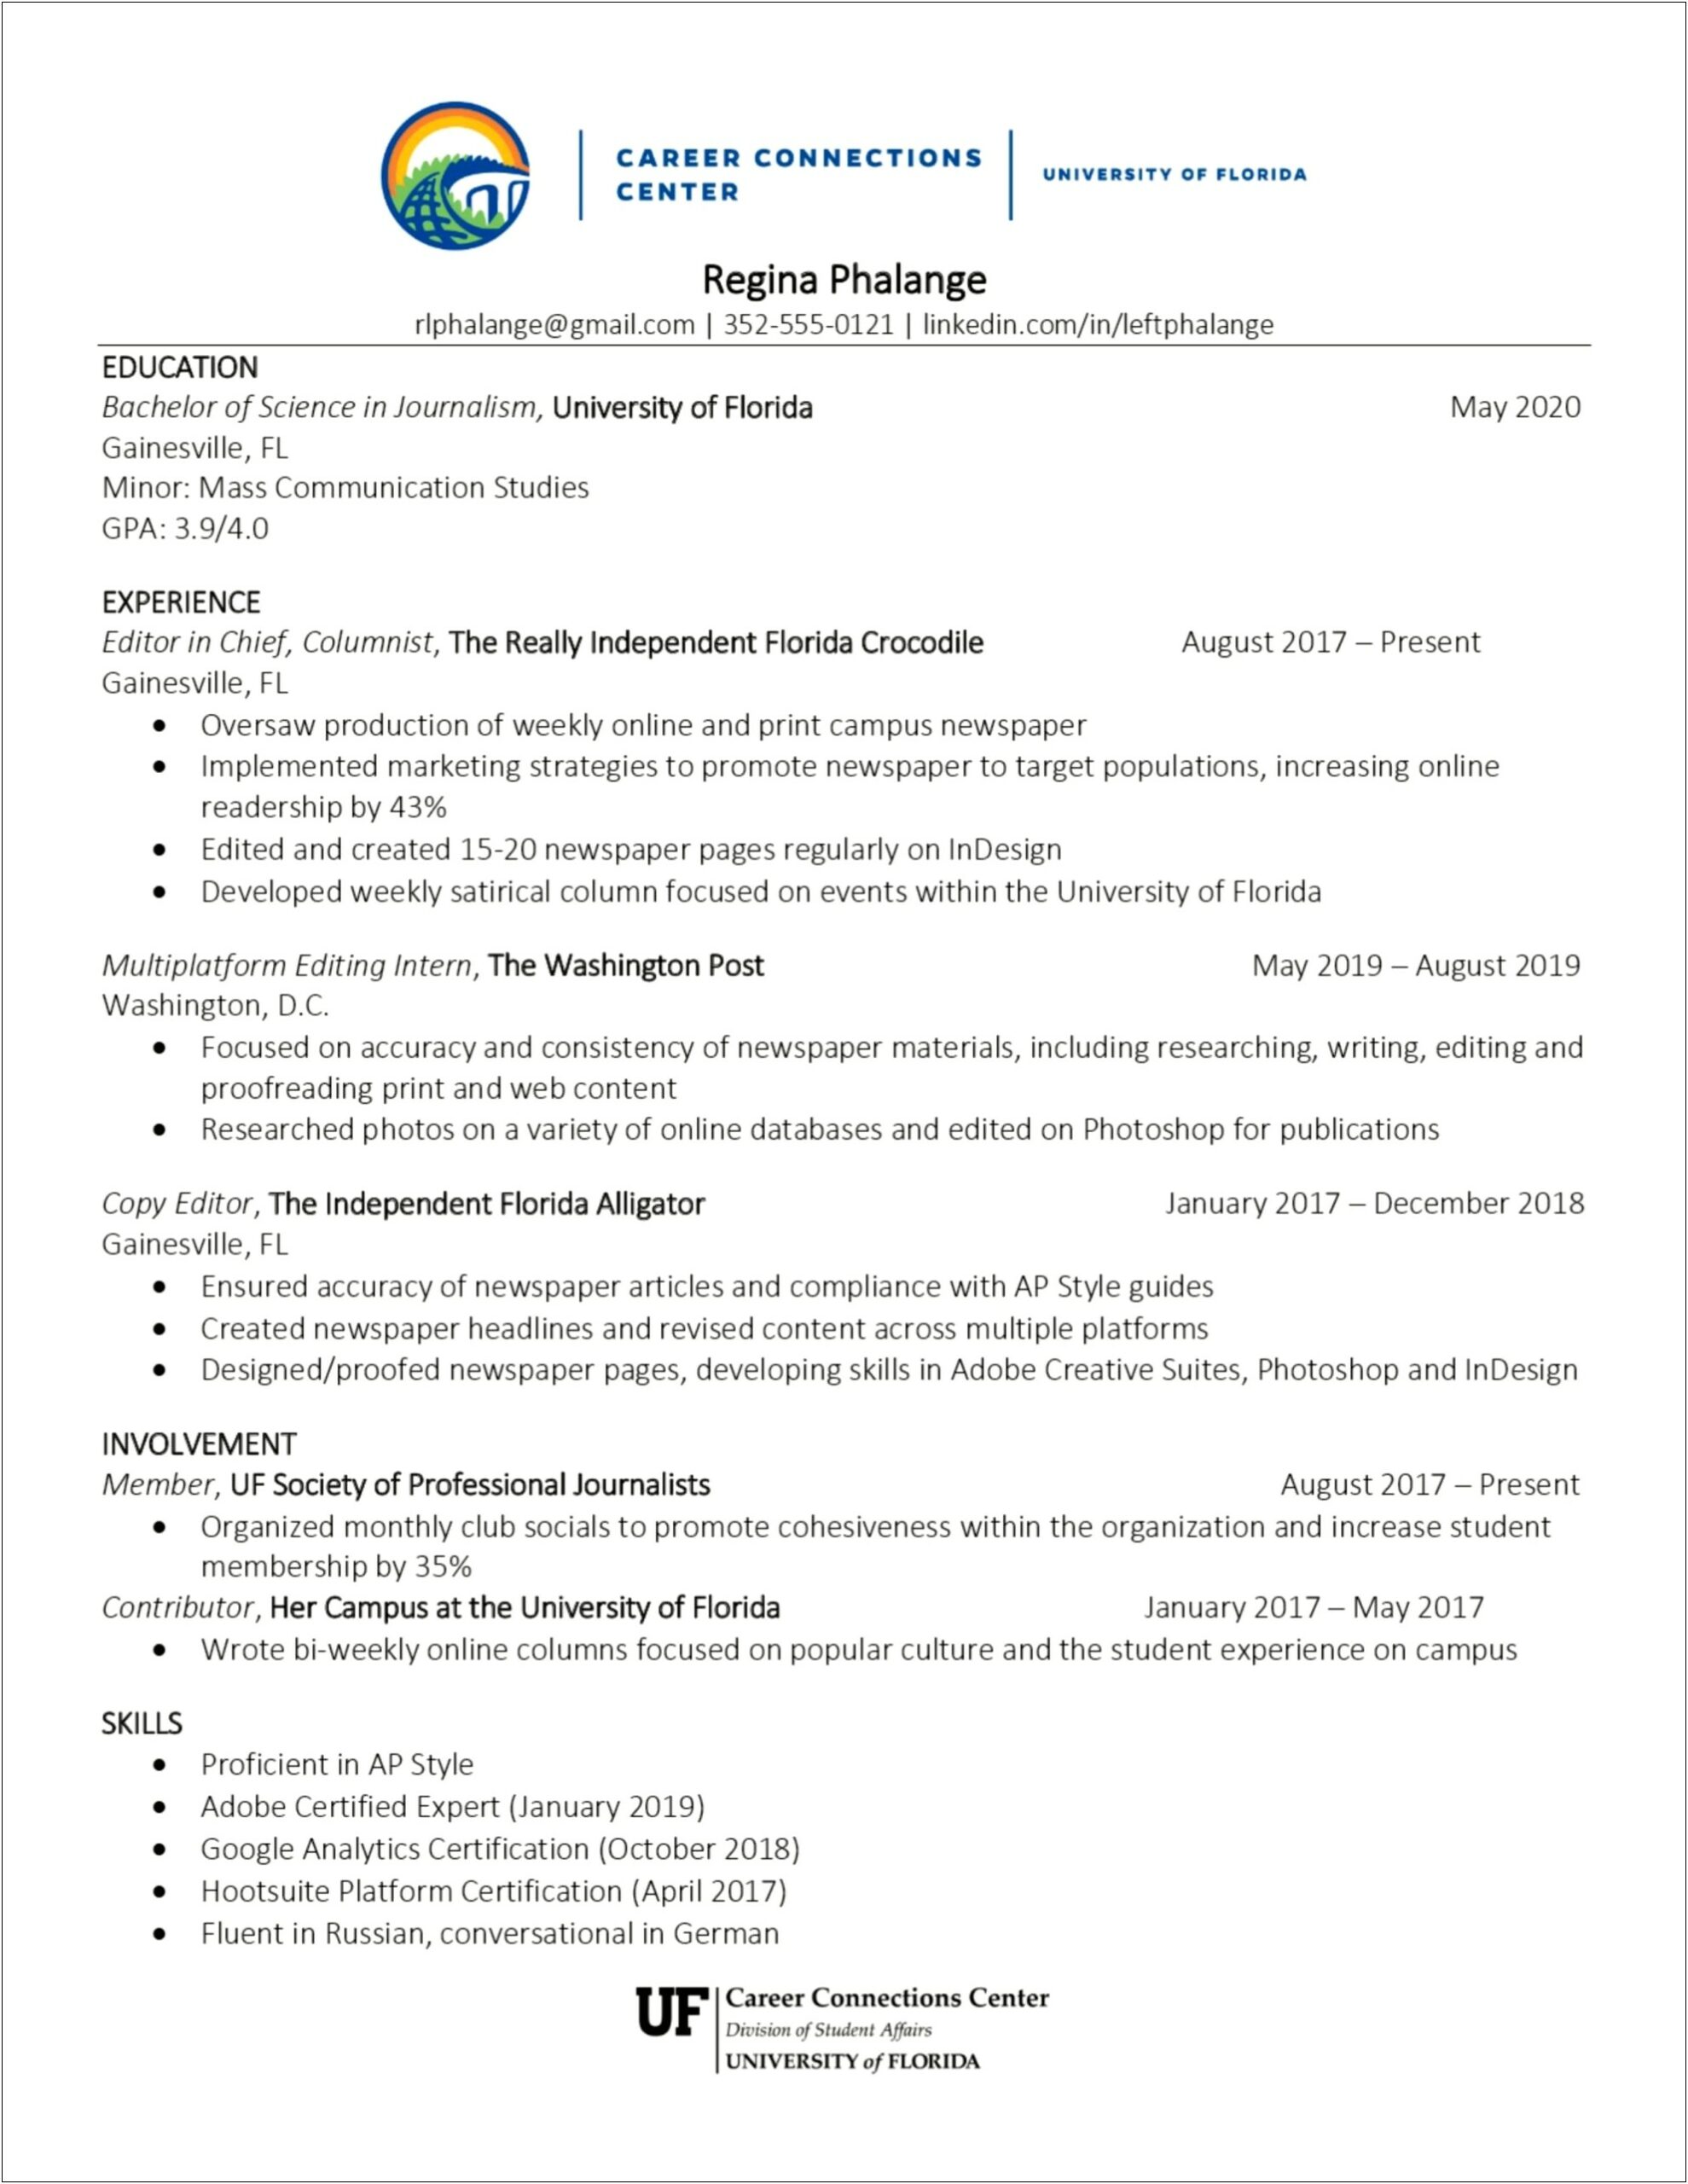 Career Change Resume Example Substance Abuse Counselor